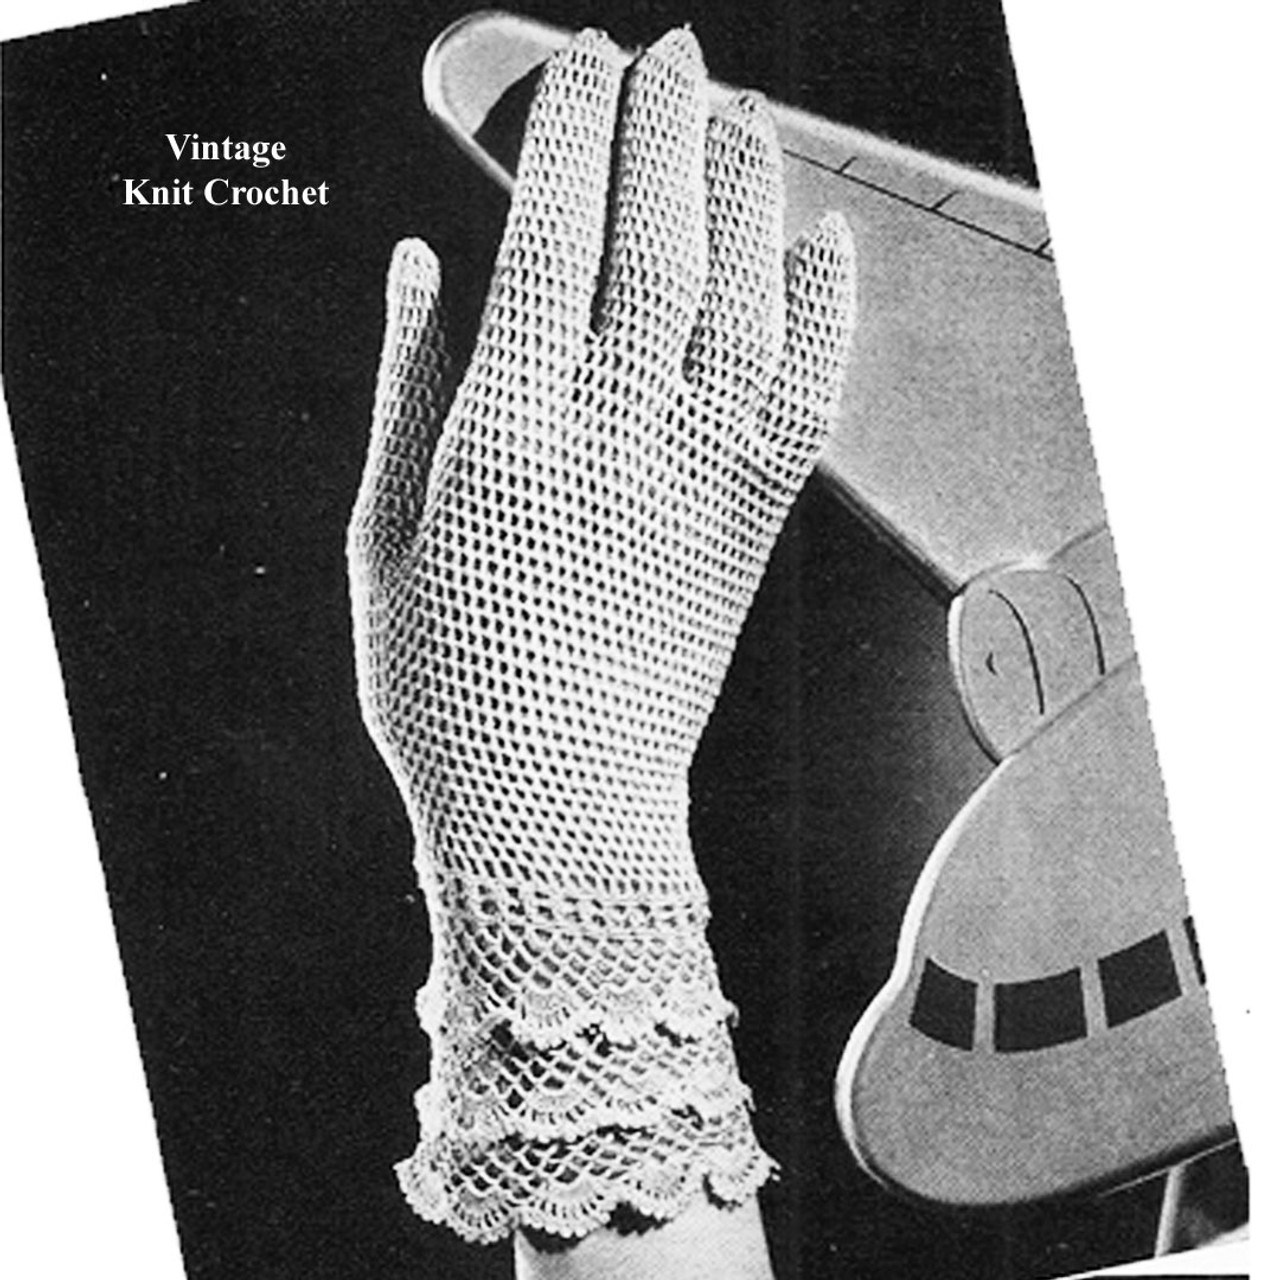 Vintage Crochet Ruffled Gloves Pattern in Lacy Stitch 